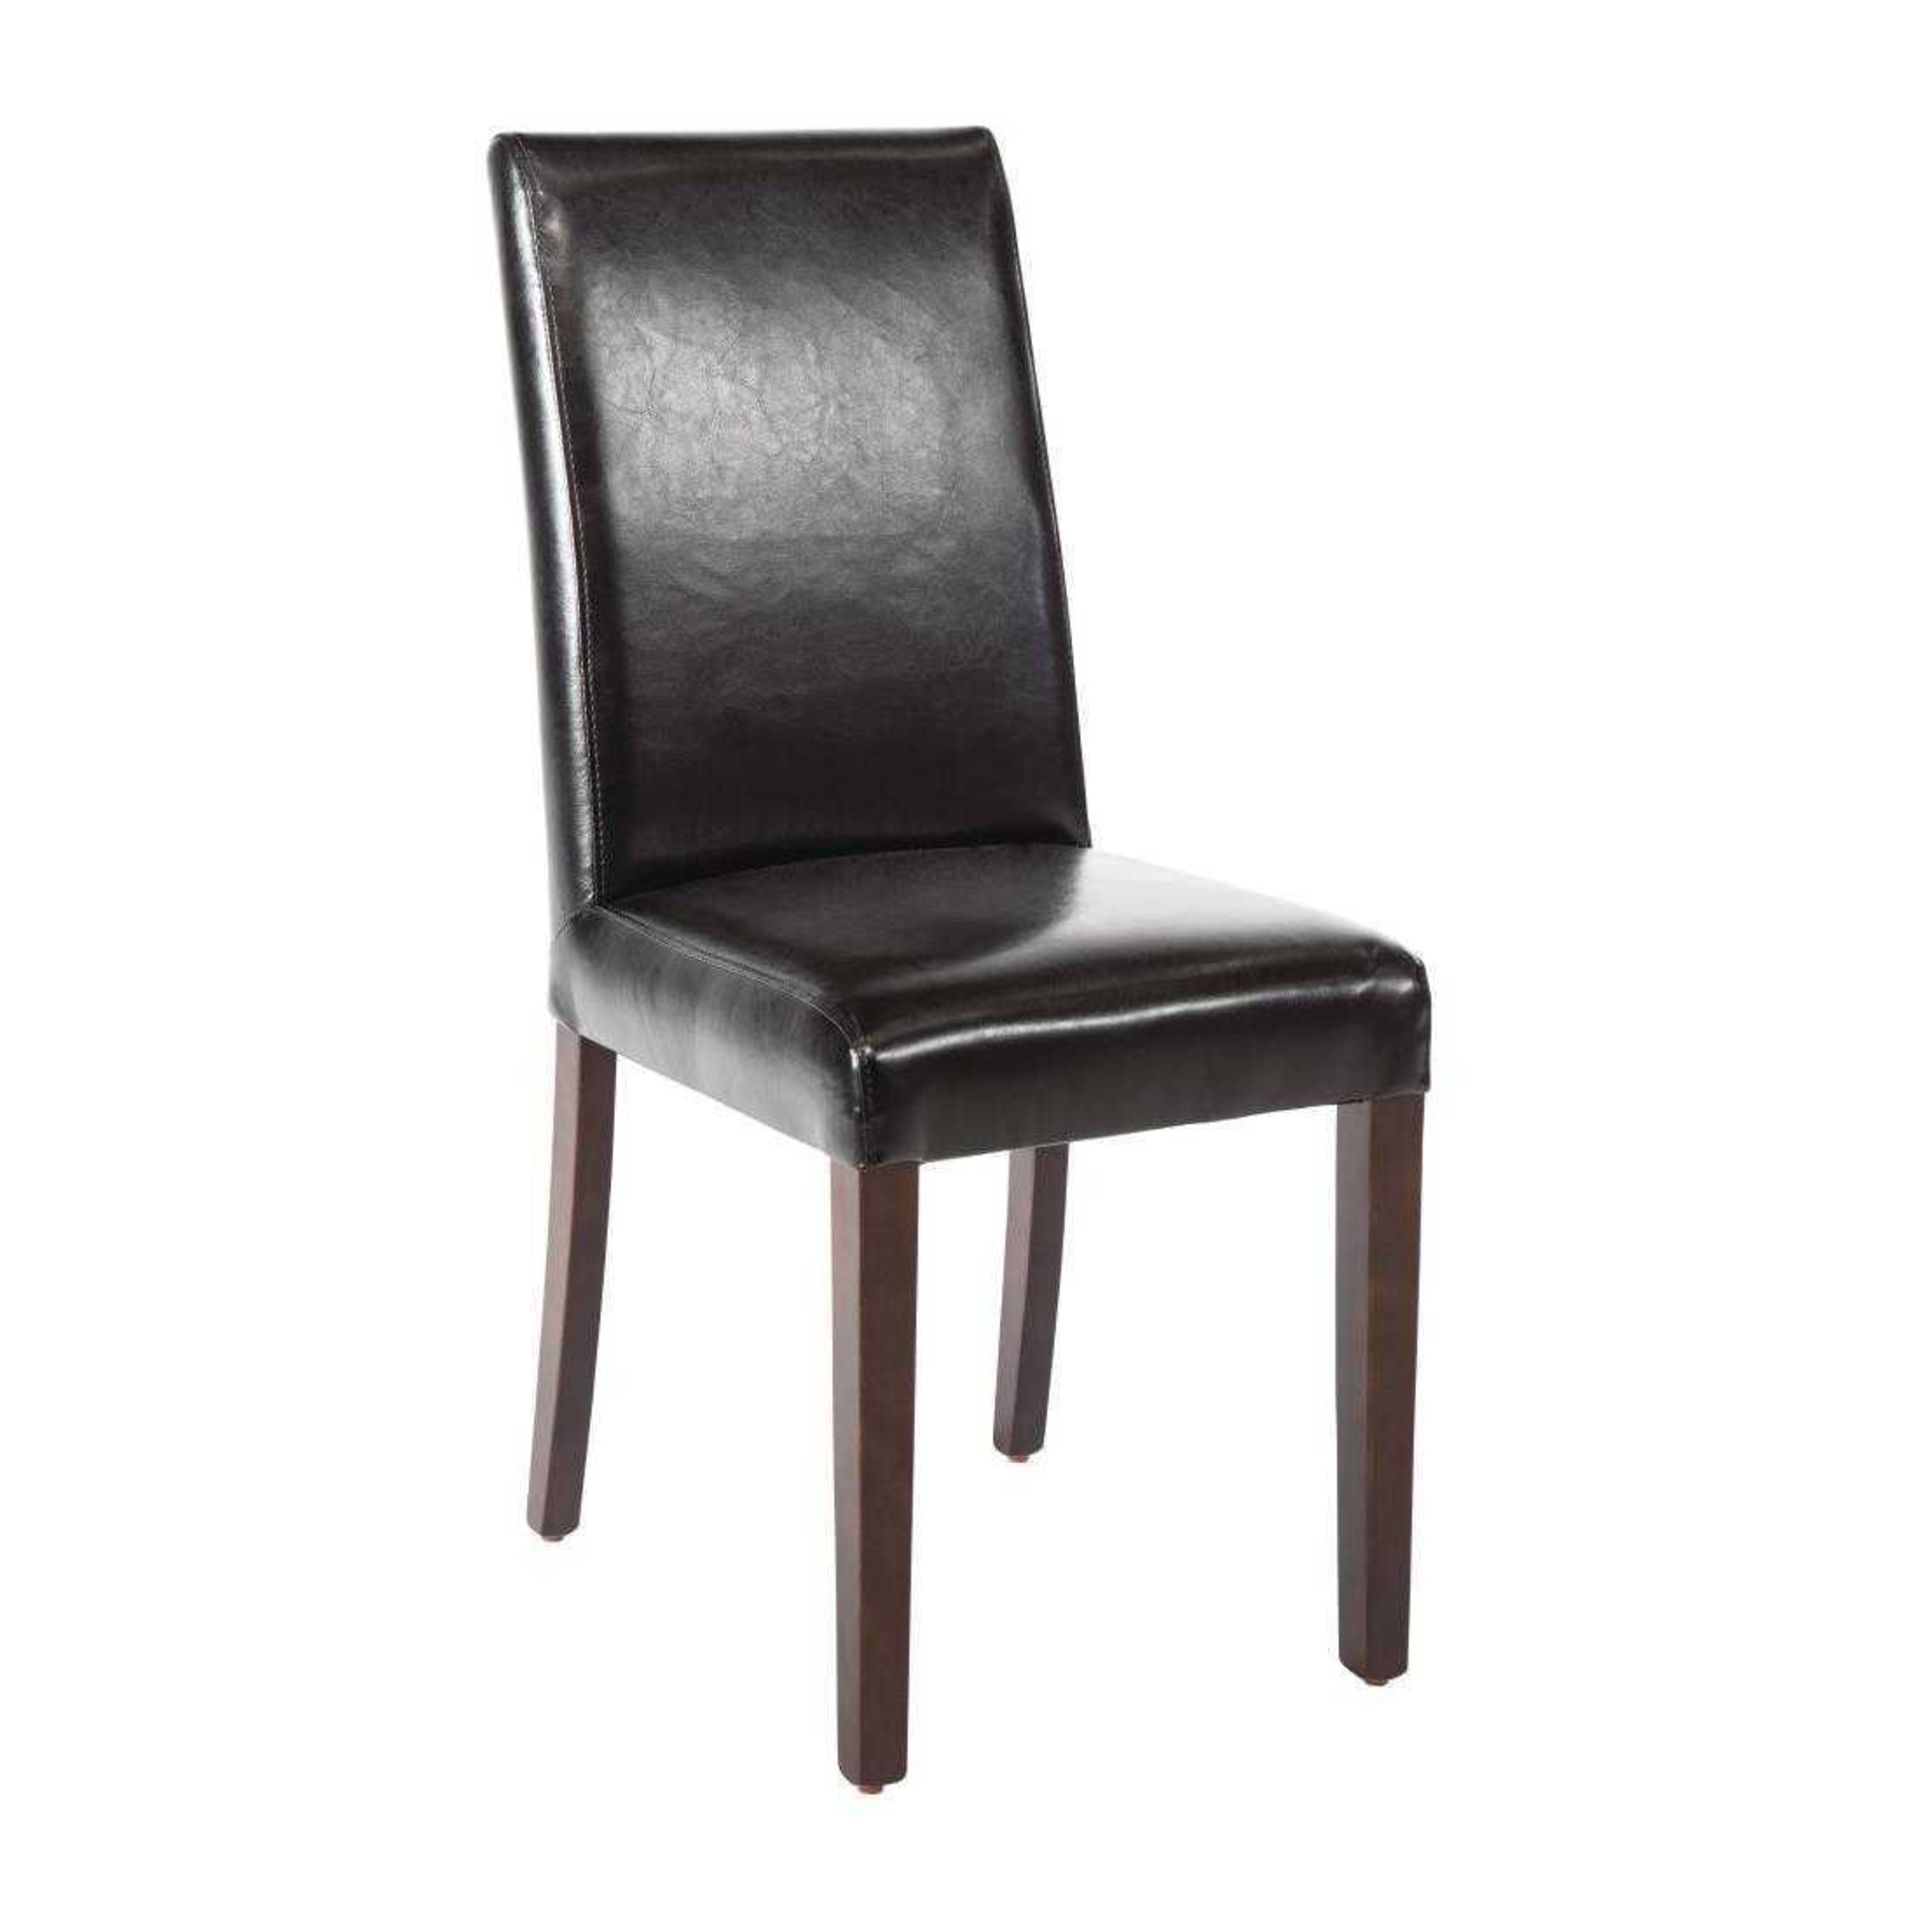 Rrp £110 Boxed Bartlomiej Dinning Chairs 2Pcs In Black